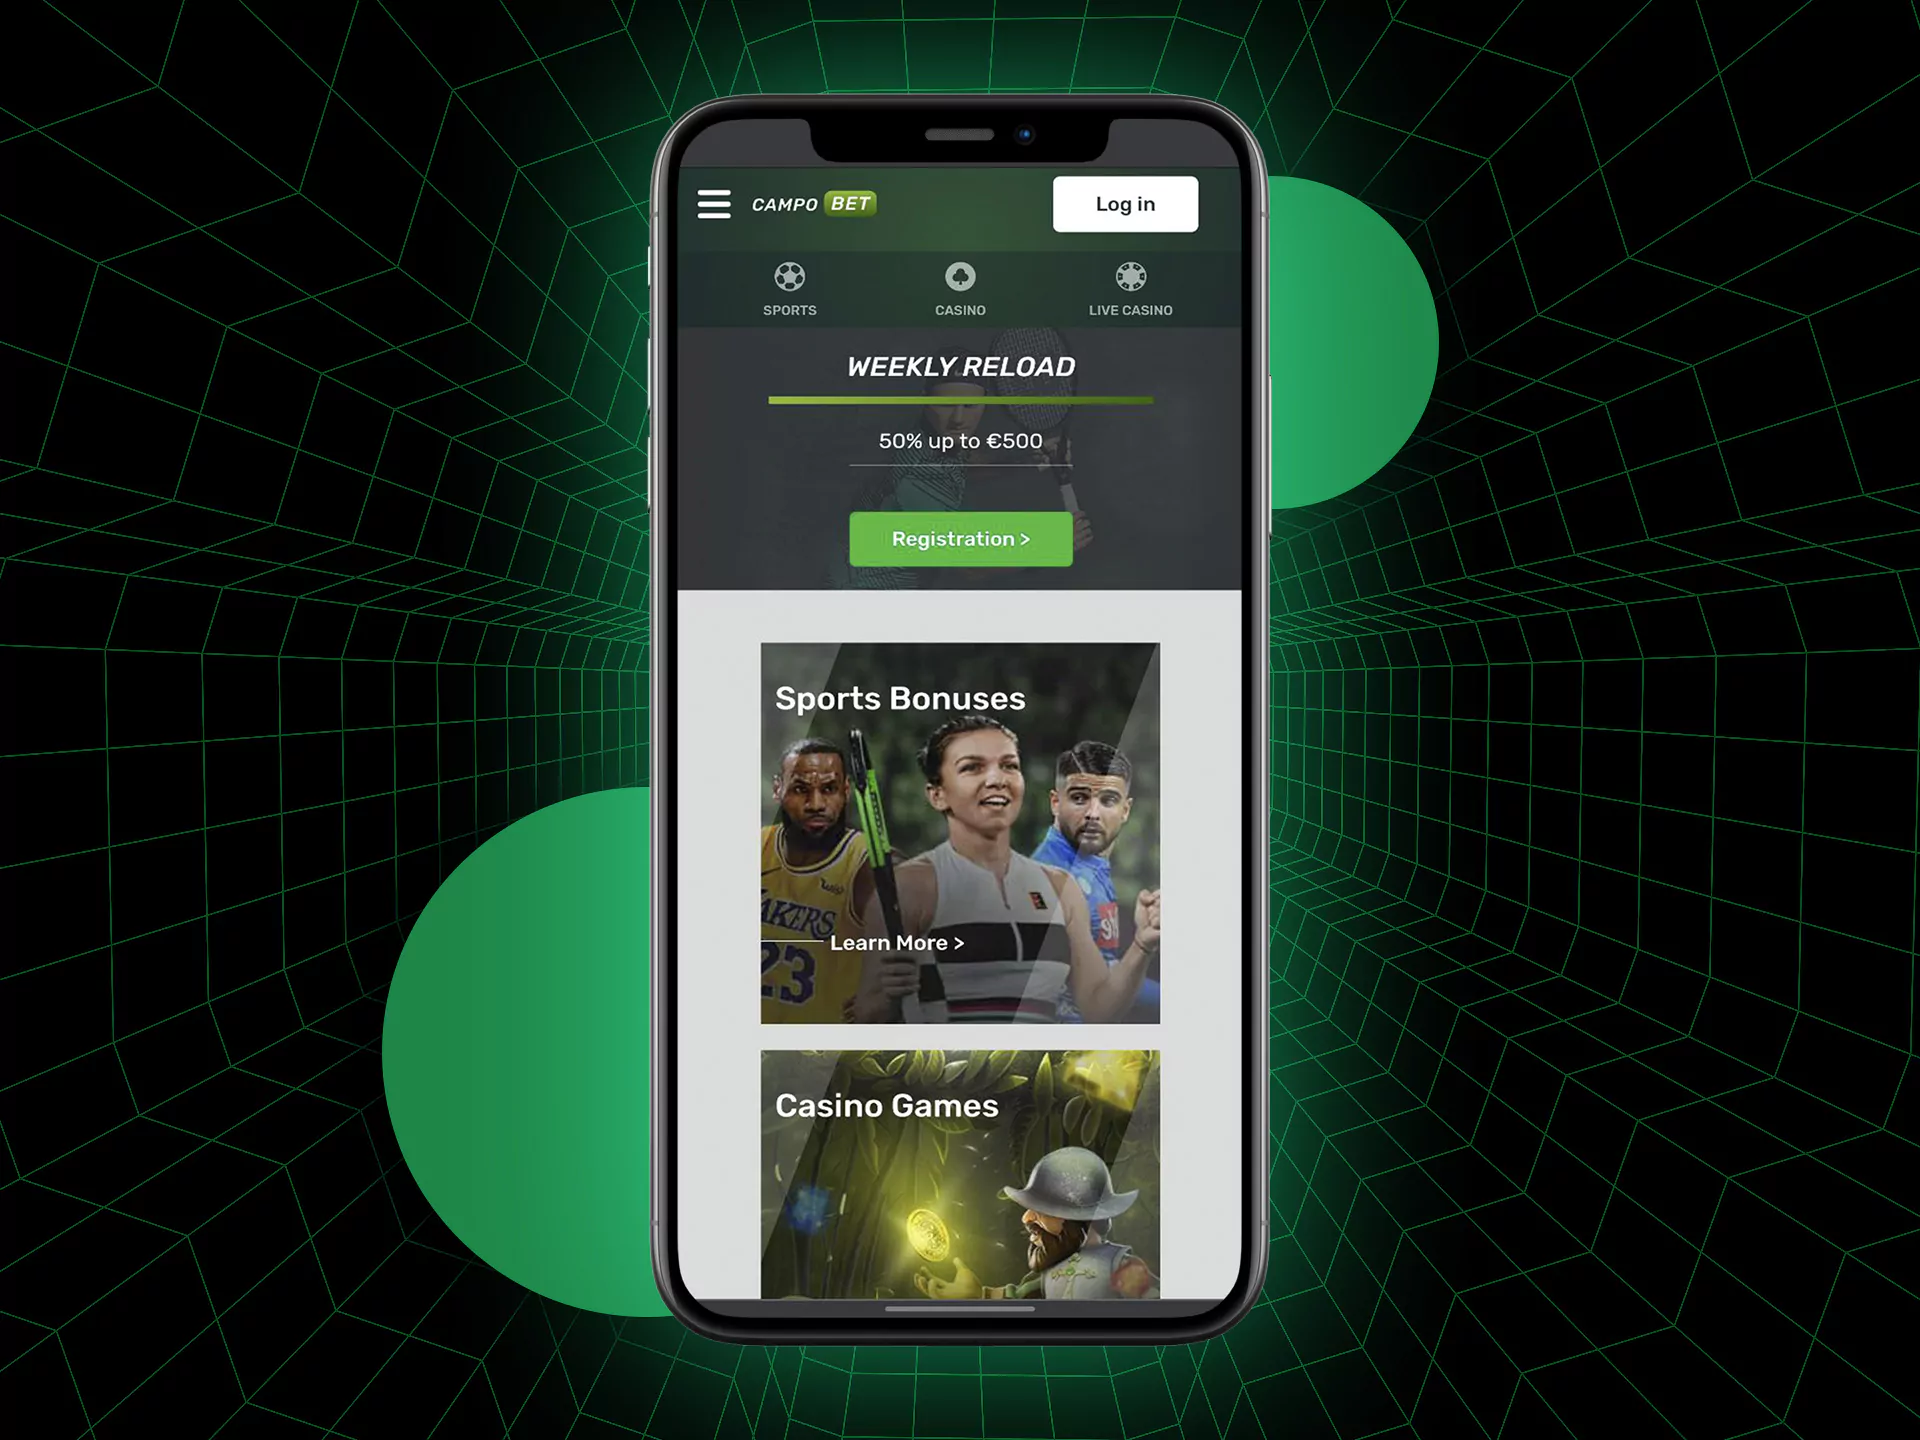 The Campobet app helps those users who want to bet from anywhere.